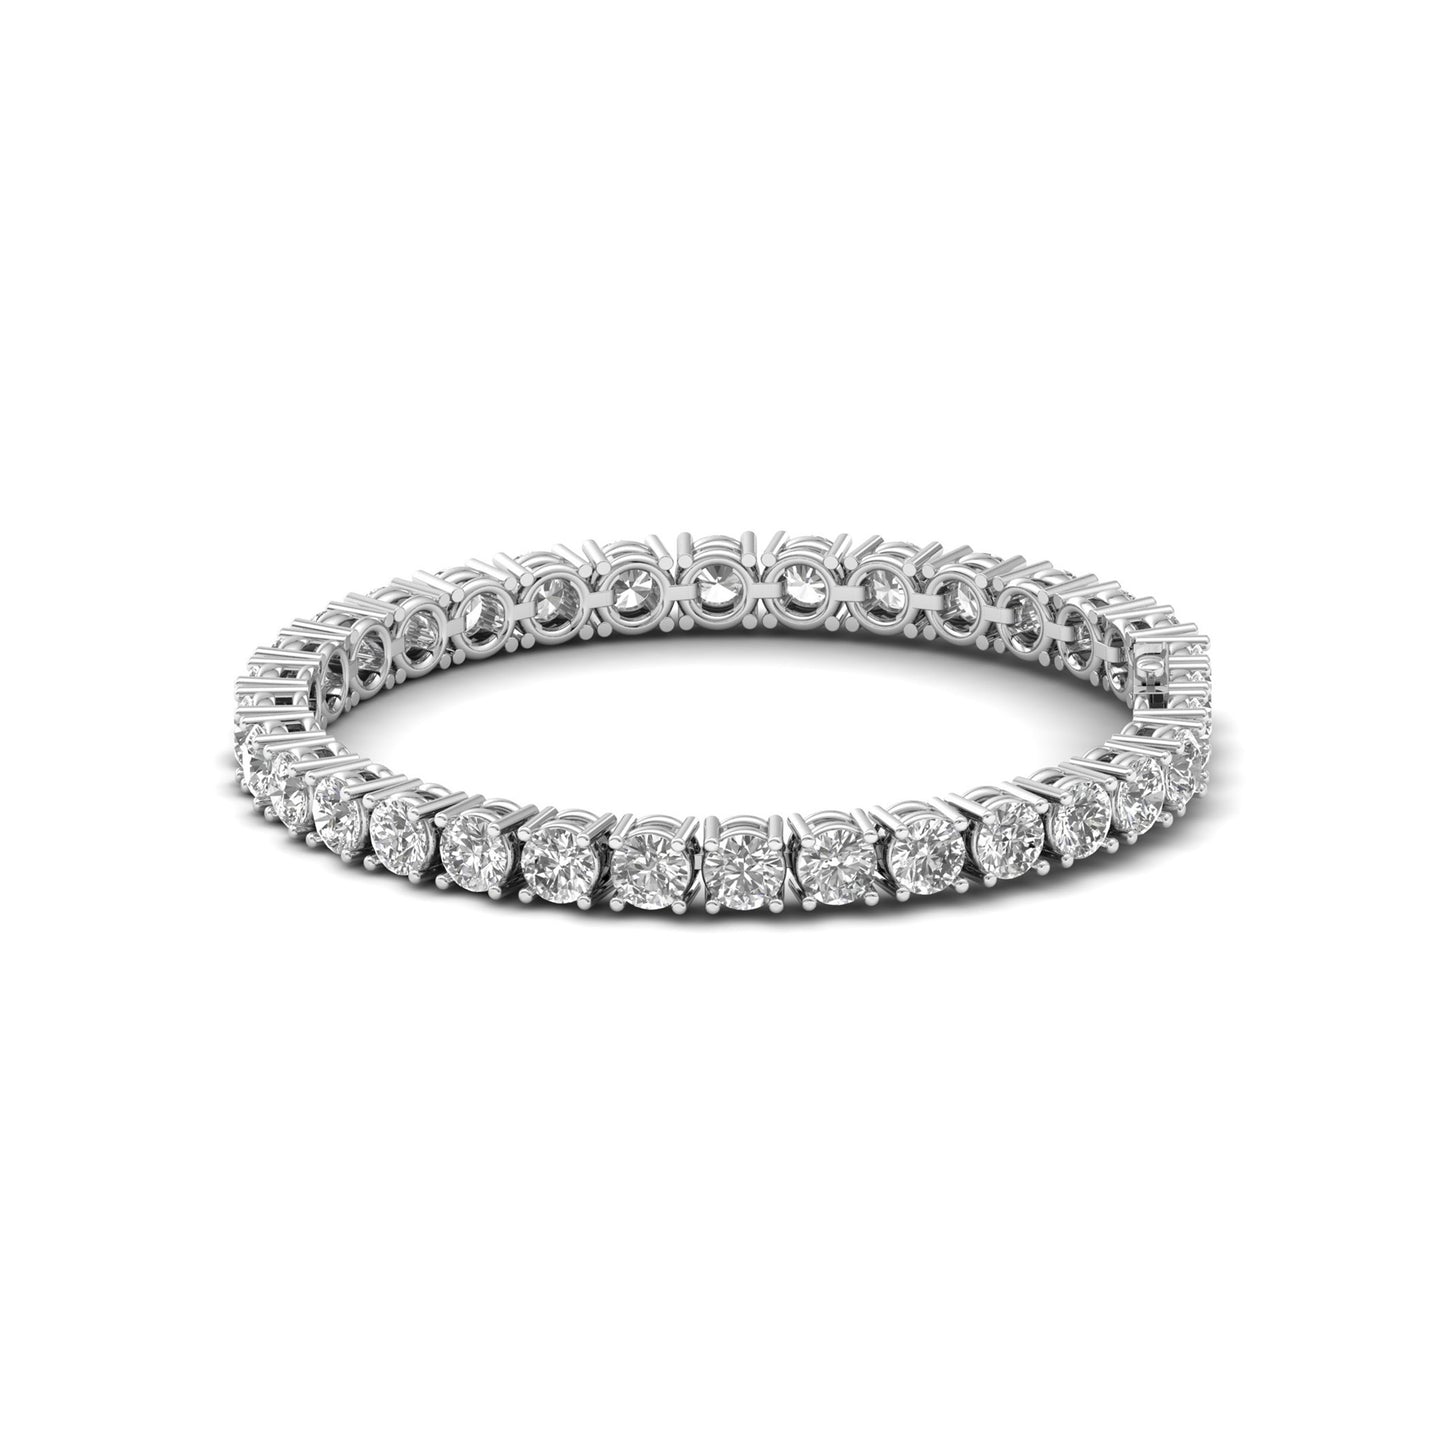 Circling Brilliance: Elevate Your Style with Our Exquisite Lab Grown Diamond Bracelet in Round Shape!